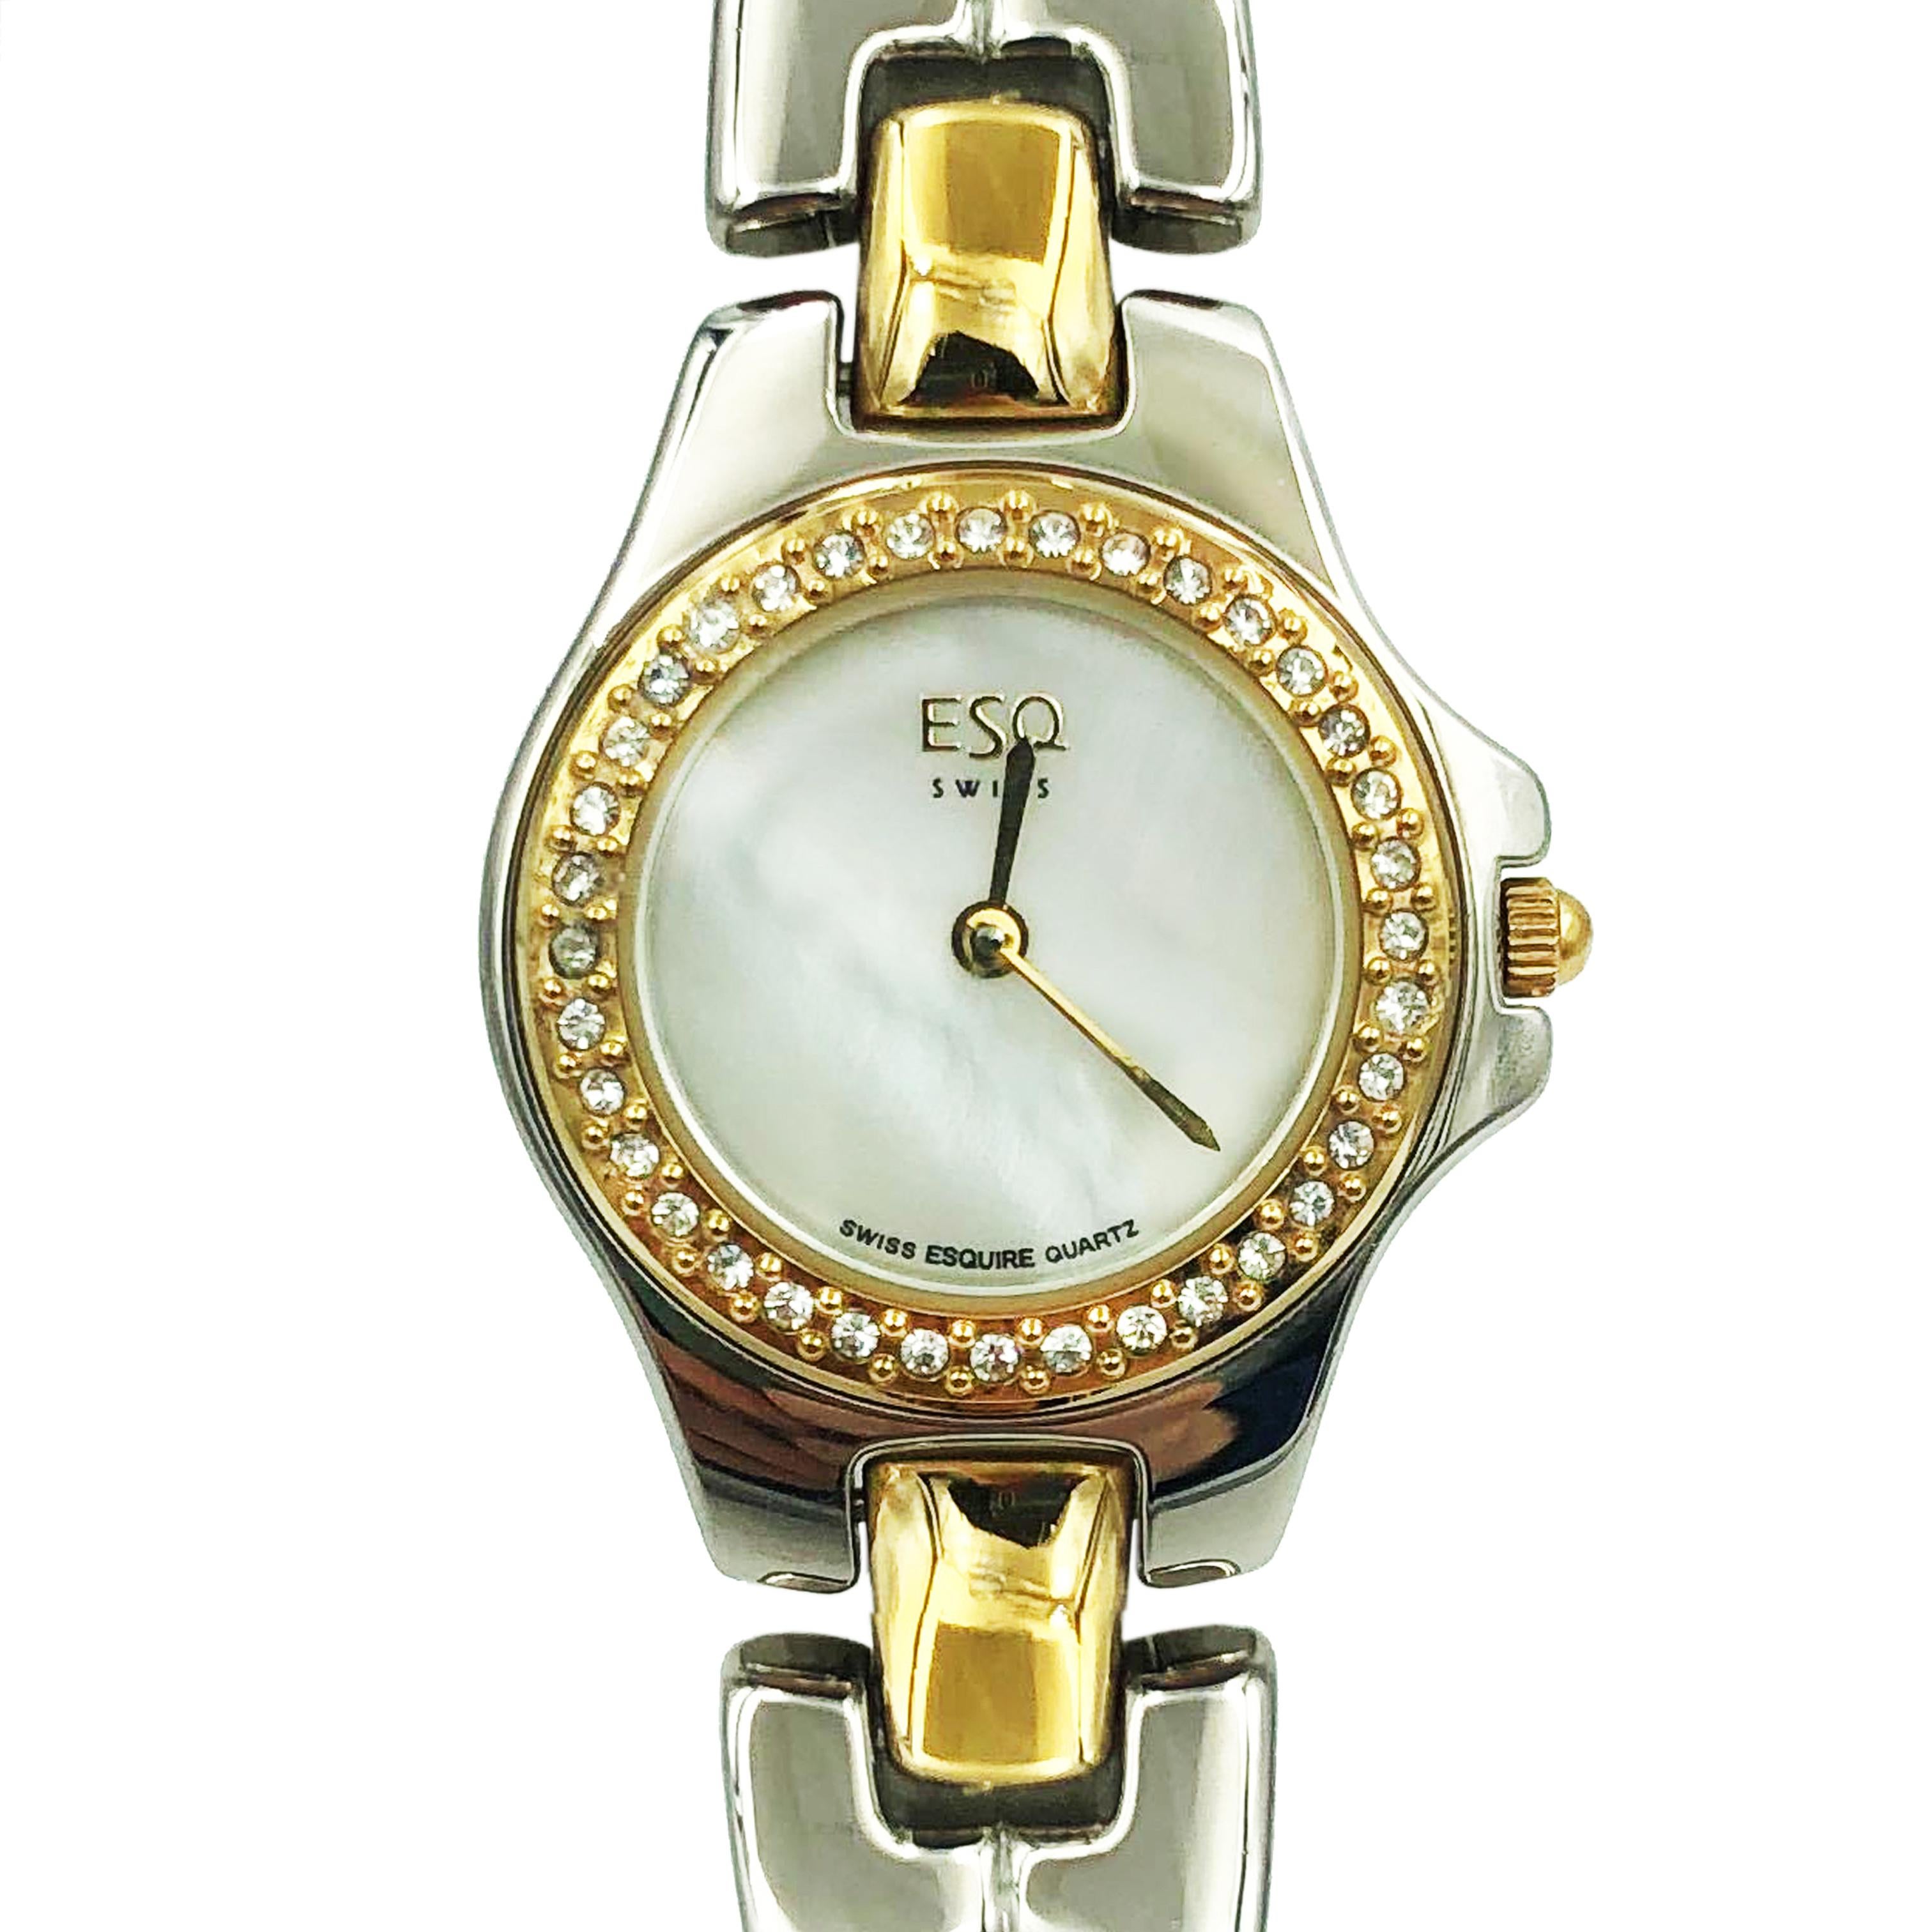 Pre owned ESQ Movado Contessa Two Tone Steel MOP Dial Quartz Ladies Watch 07100506. The Watch Has Scratches and Might Have Little Dents. Original Box and Papers are NOT Included. Comes With Chronostore Presentation Box and Chronostore Authenticity